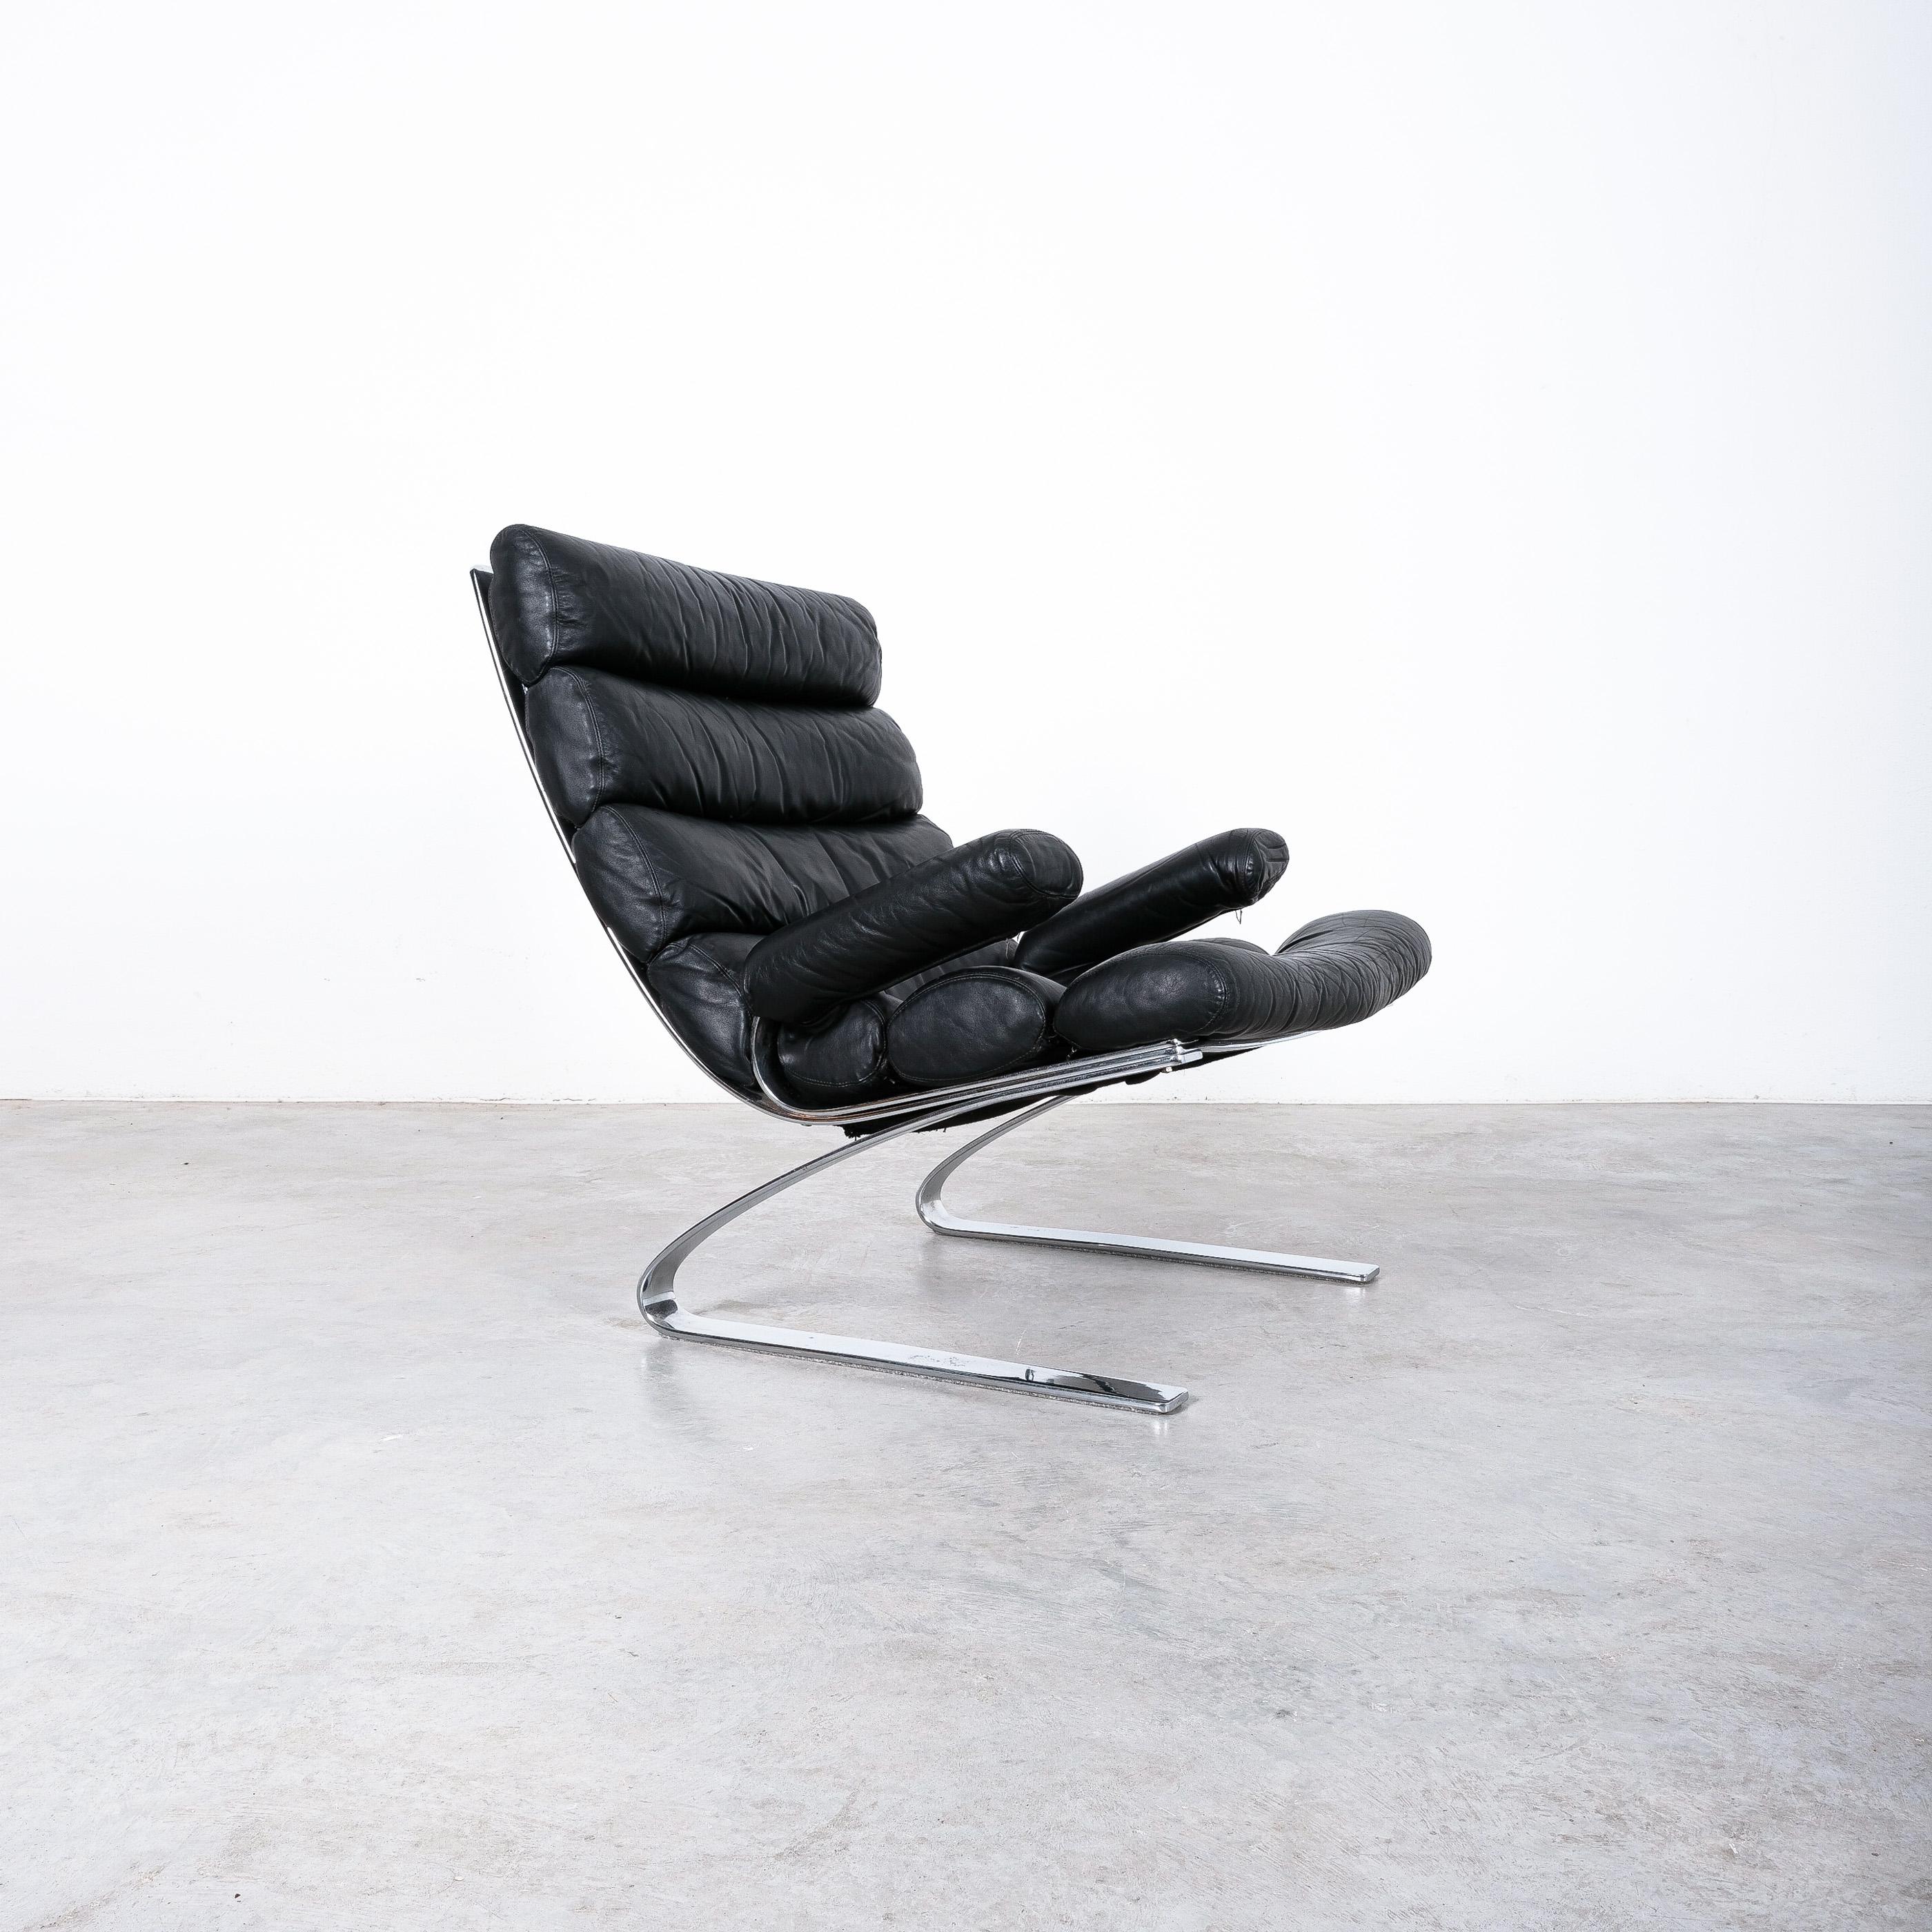 First Edition 'Sinus' lounge armchair by Reinhold Adolf & Hans-Jürgen Schröpfer for Cor, Germany 1976

Original Sinus chair with its original smooth und unharmed leather. The Sinus chair received its name from the formal aesthetics of the steel